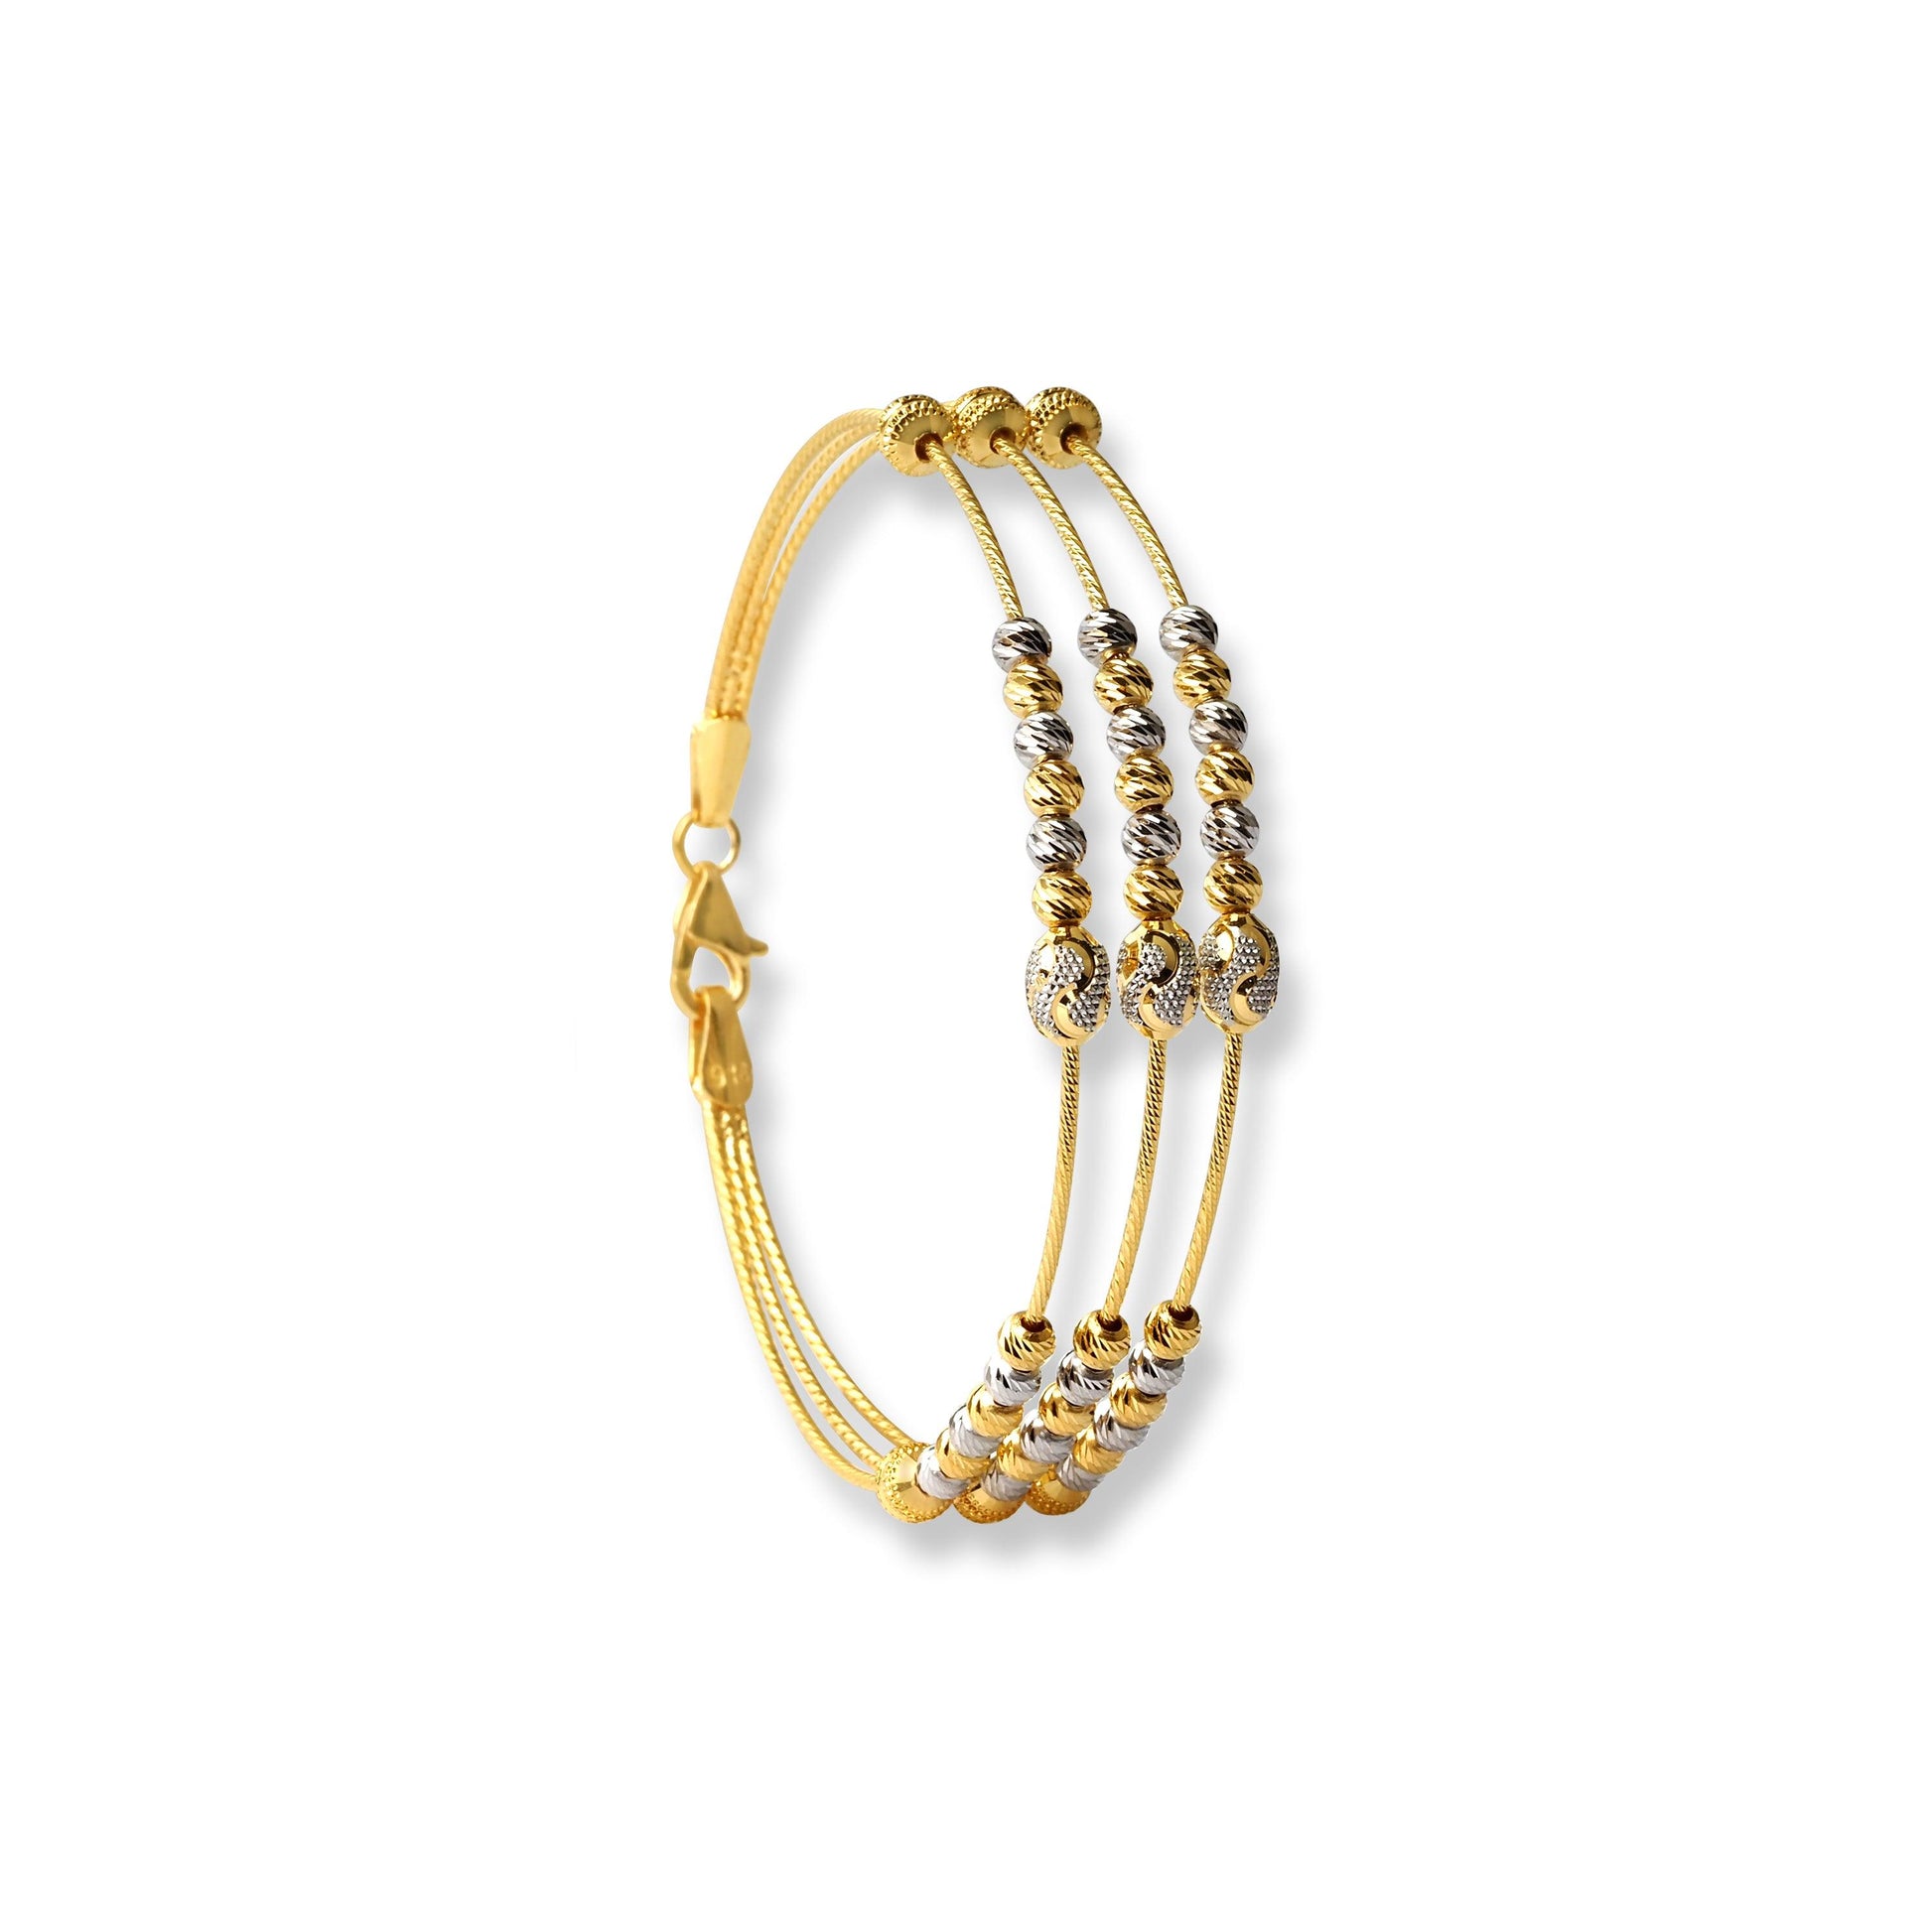 22ct Gold Rhodium Plated Beads Bangle With Rounded Trigger Clasp (11.2g) B-8502 - Minar Jewellers